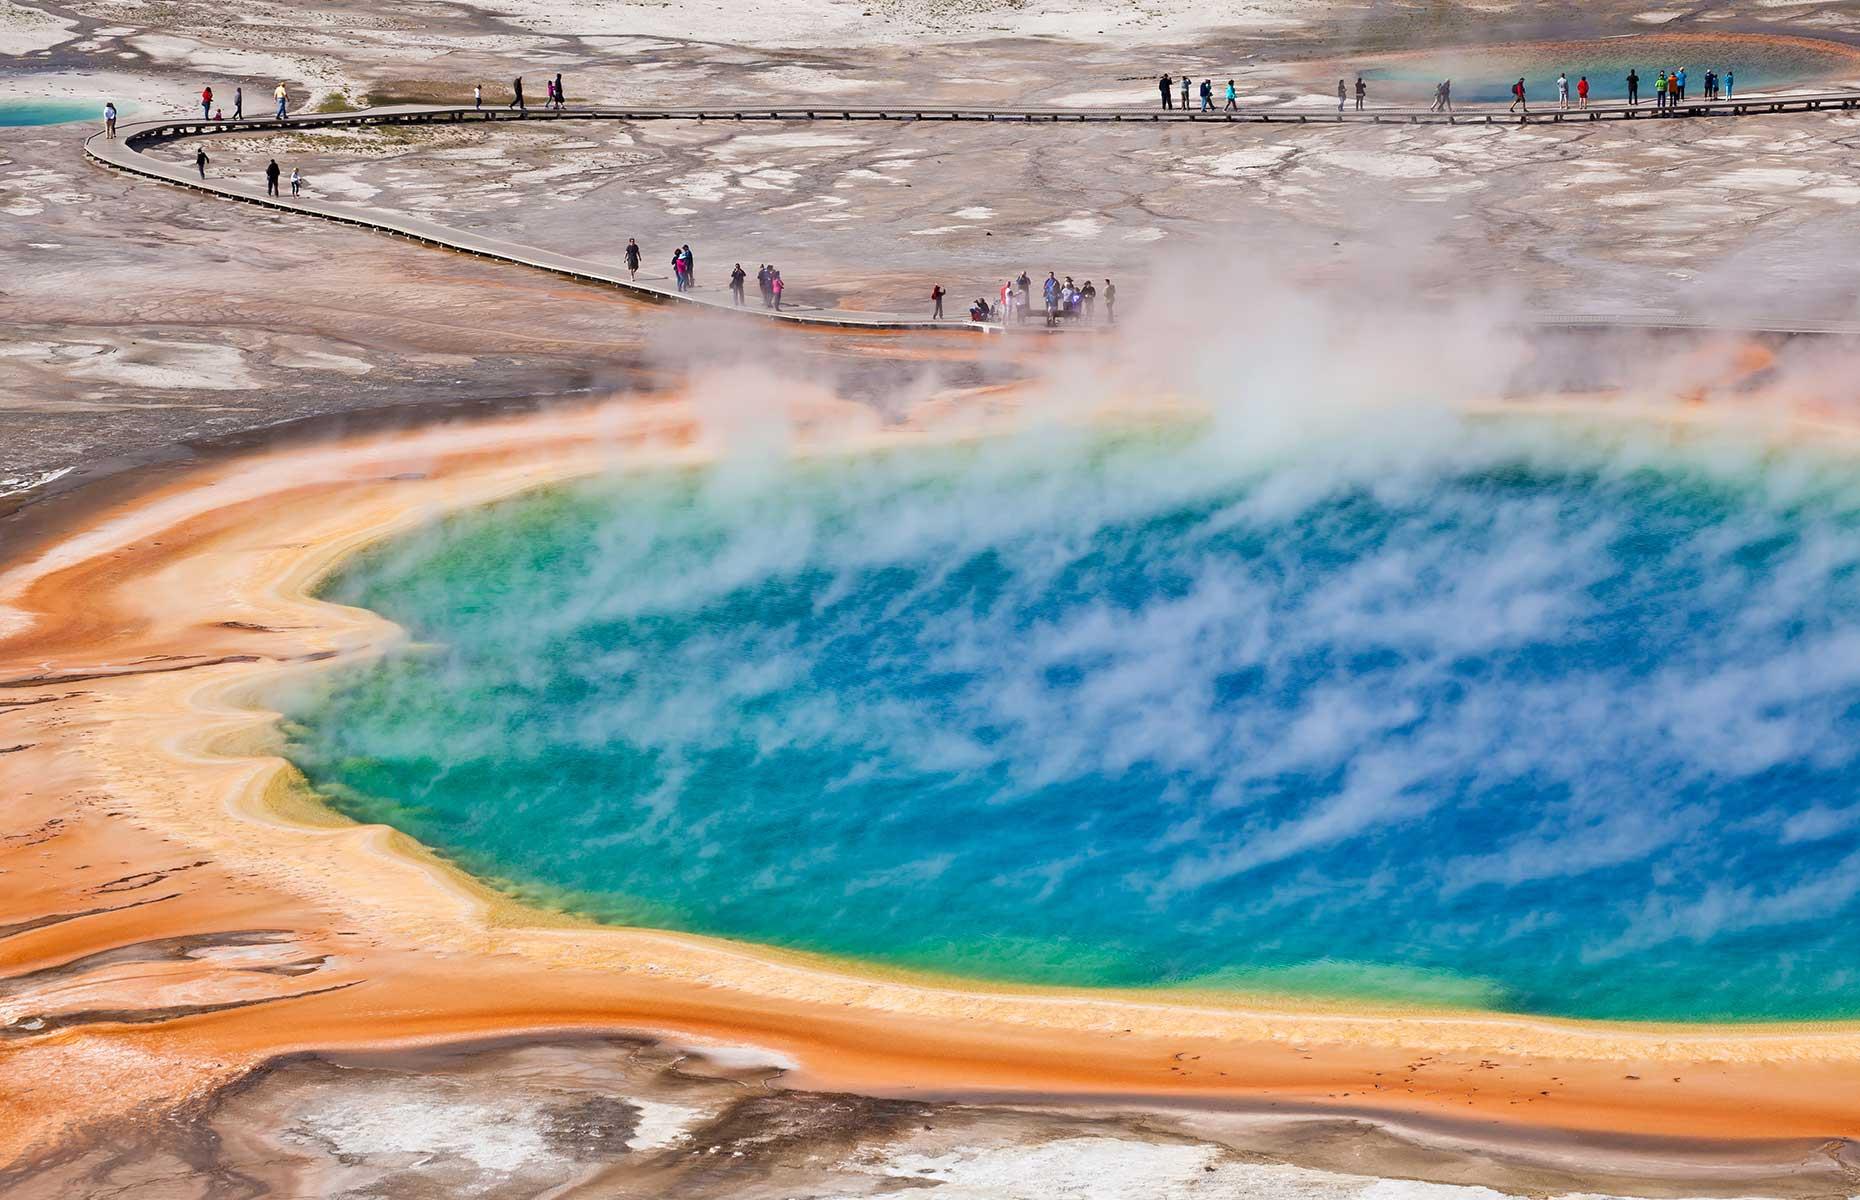 <p>Yellowstone National Park is famous for its steaming hot springs, with temperatures known to reach scorching heights of 189°F. Barricades and boardwalks keep visitors at a safe distance but that didn’t seem to deter <a href="https://www.express.co.uk/travel/articles/1023127/yellowstone-national-park-viral-video-geyser-man-washes-feet">one man, who washed his feet in the geyser basin</a>. Miraculously, he appeared to be relatively unharmed.</p>  <p><a href="https://www.loveexploring.com/galleries/129167/the-worlds-most-epic-tourist-attraction-fails?page=1"><strong>Check out the world's most epic tourist attraction fails</strong></a></p>